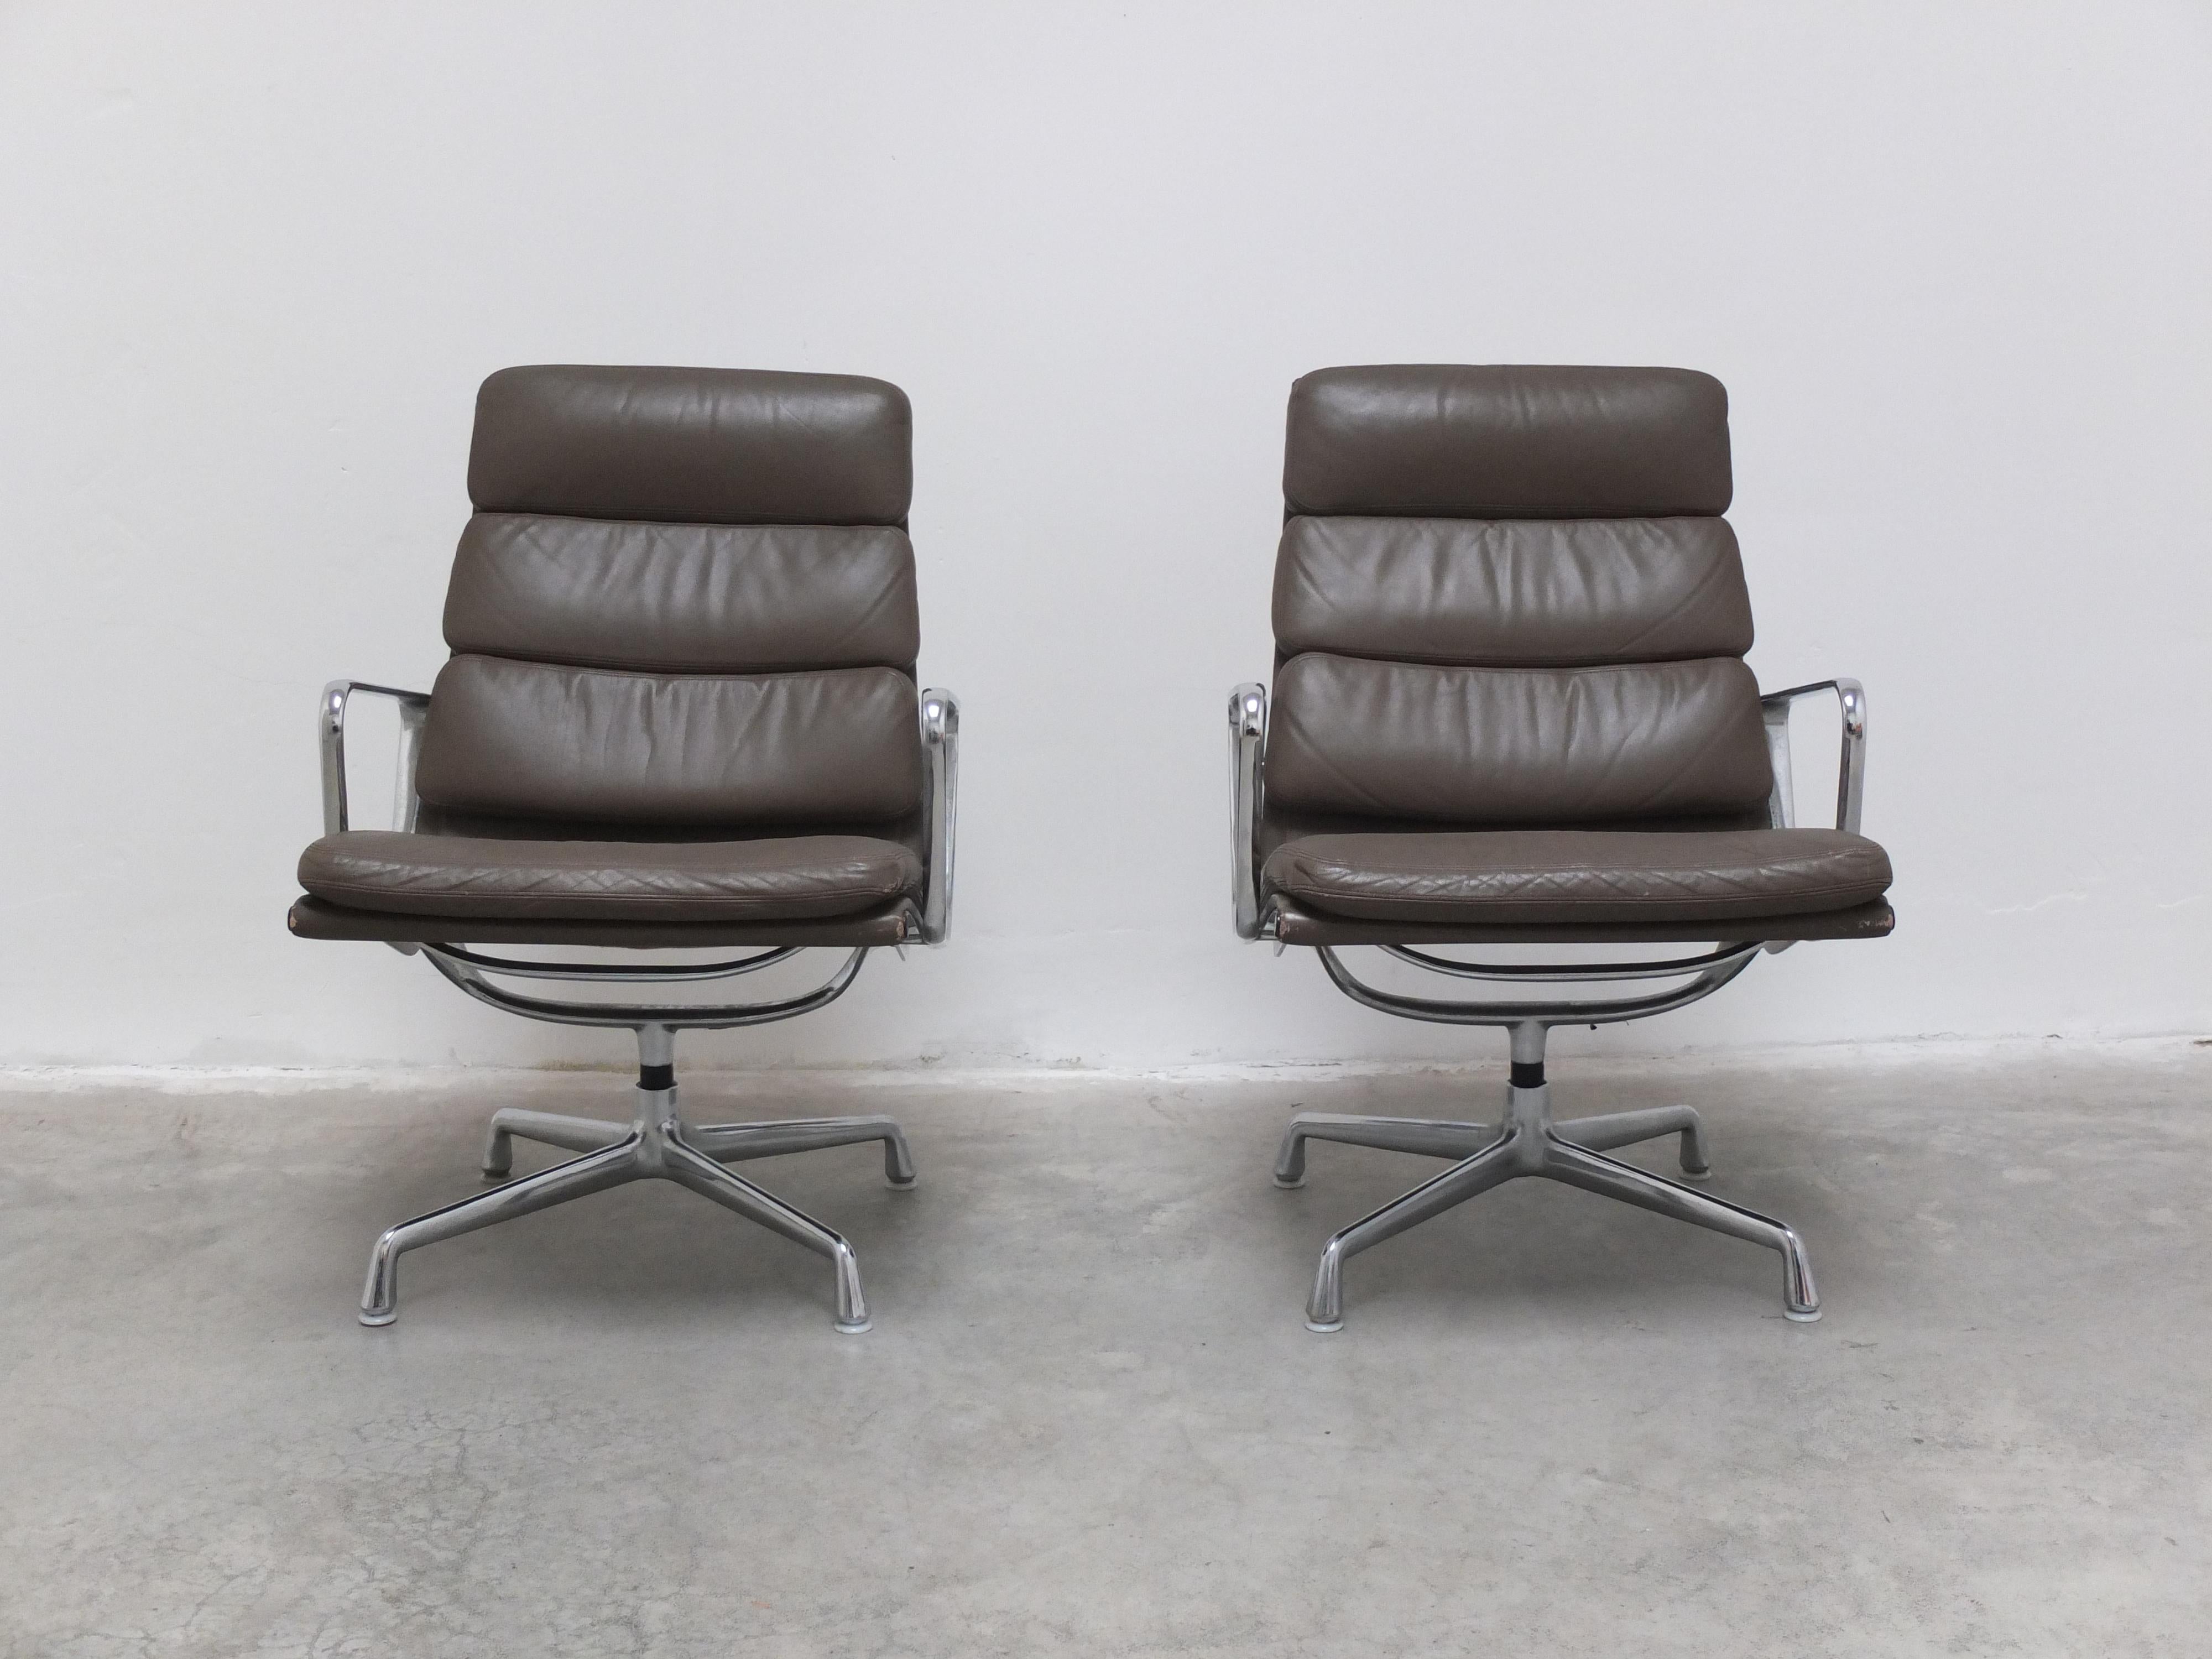 An early pair of model ‘EA216’ swivel lounge chairs designed by Charles & Ray Eames in 1969. This is a high back version with rare sand-colored brown Soft Pad leather for maximum comfort. It has an aluminum frame and armrests and stands on a 4-feet